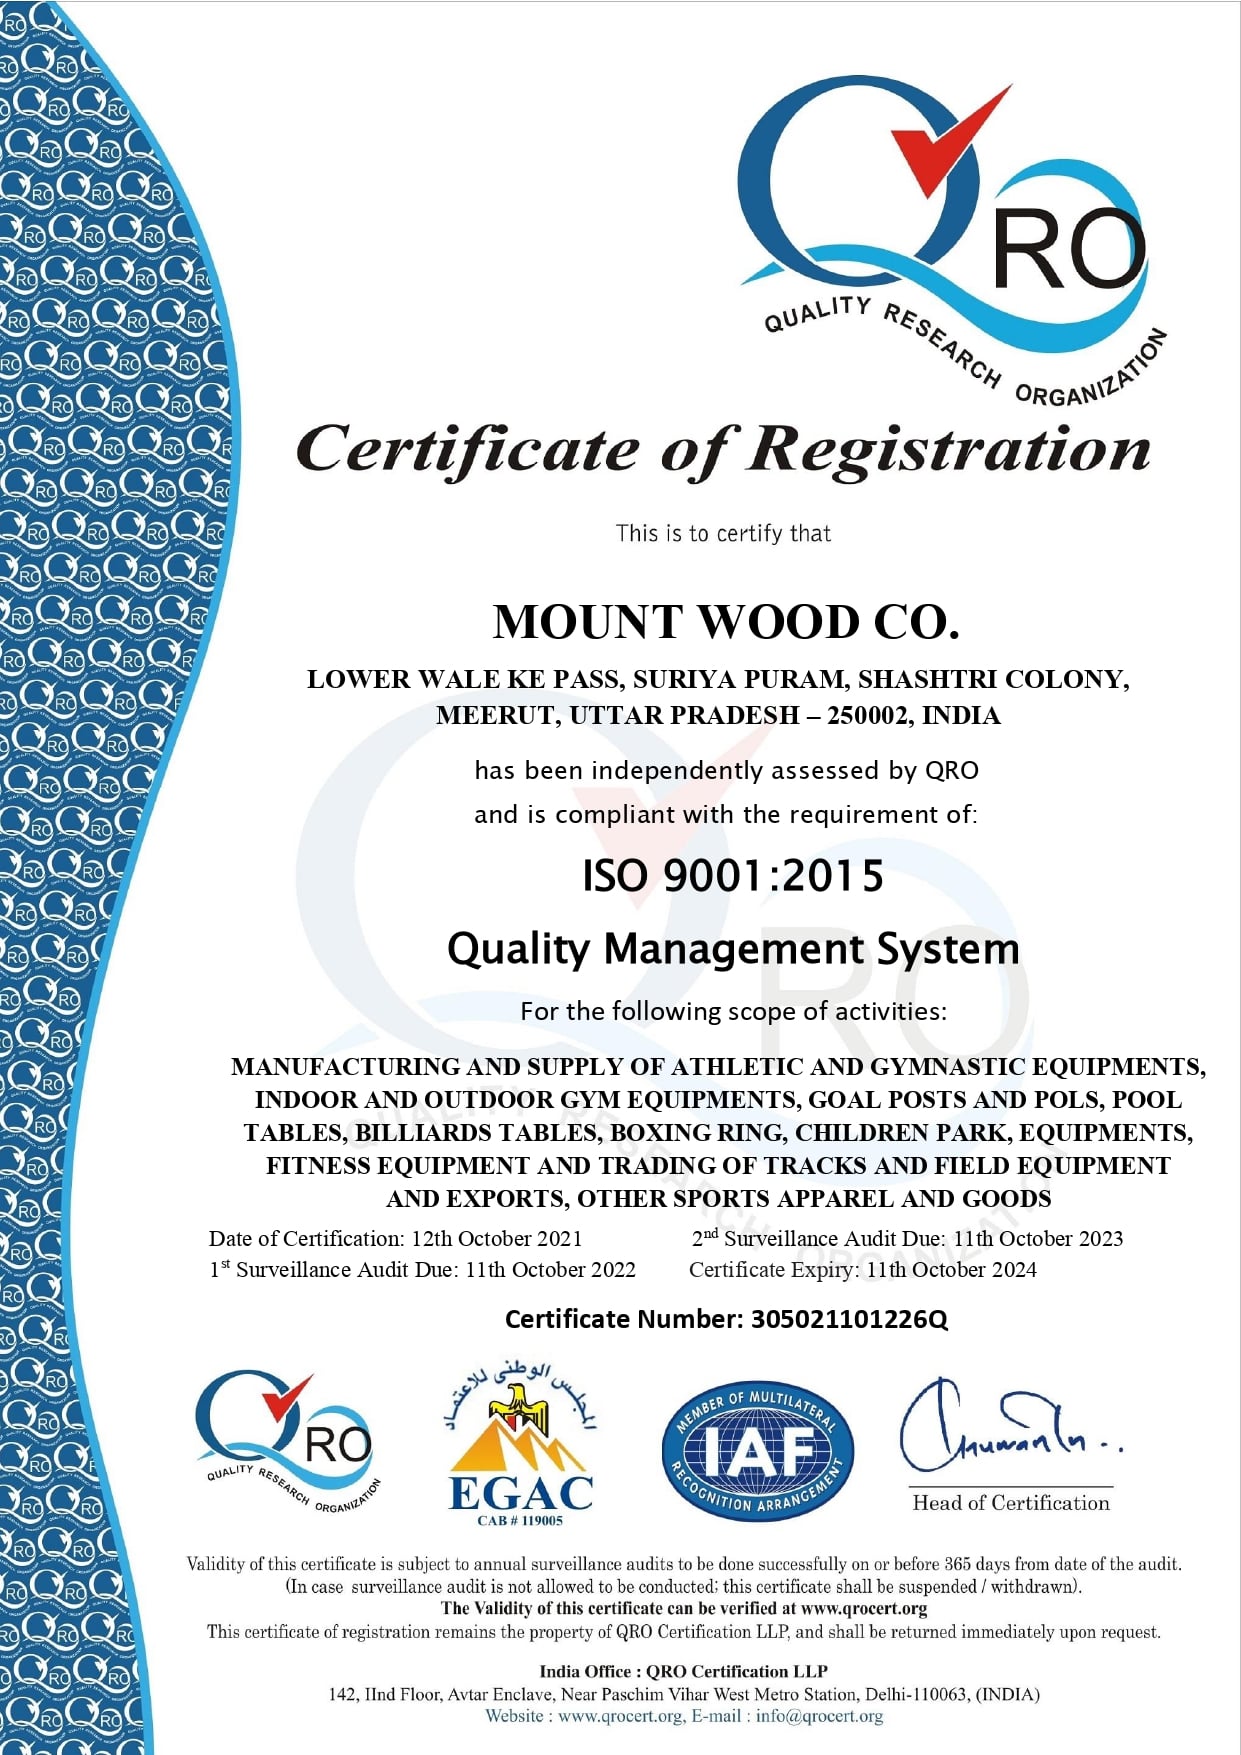 ISO 9001:2015 Certifcate